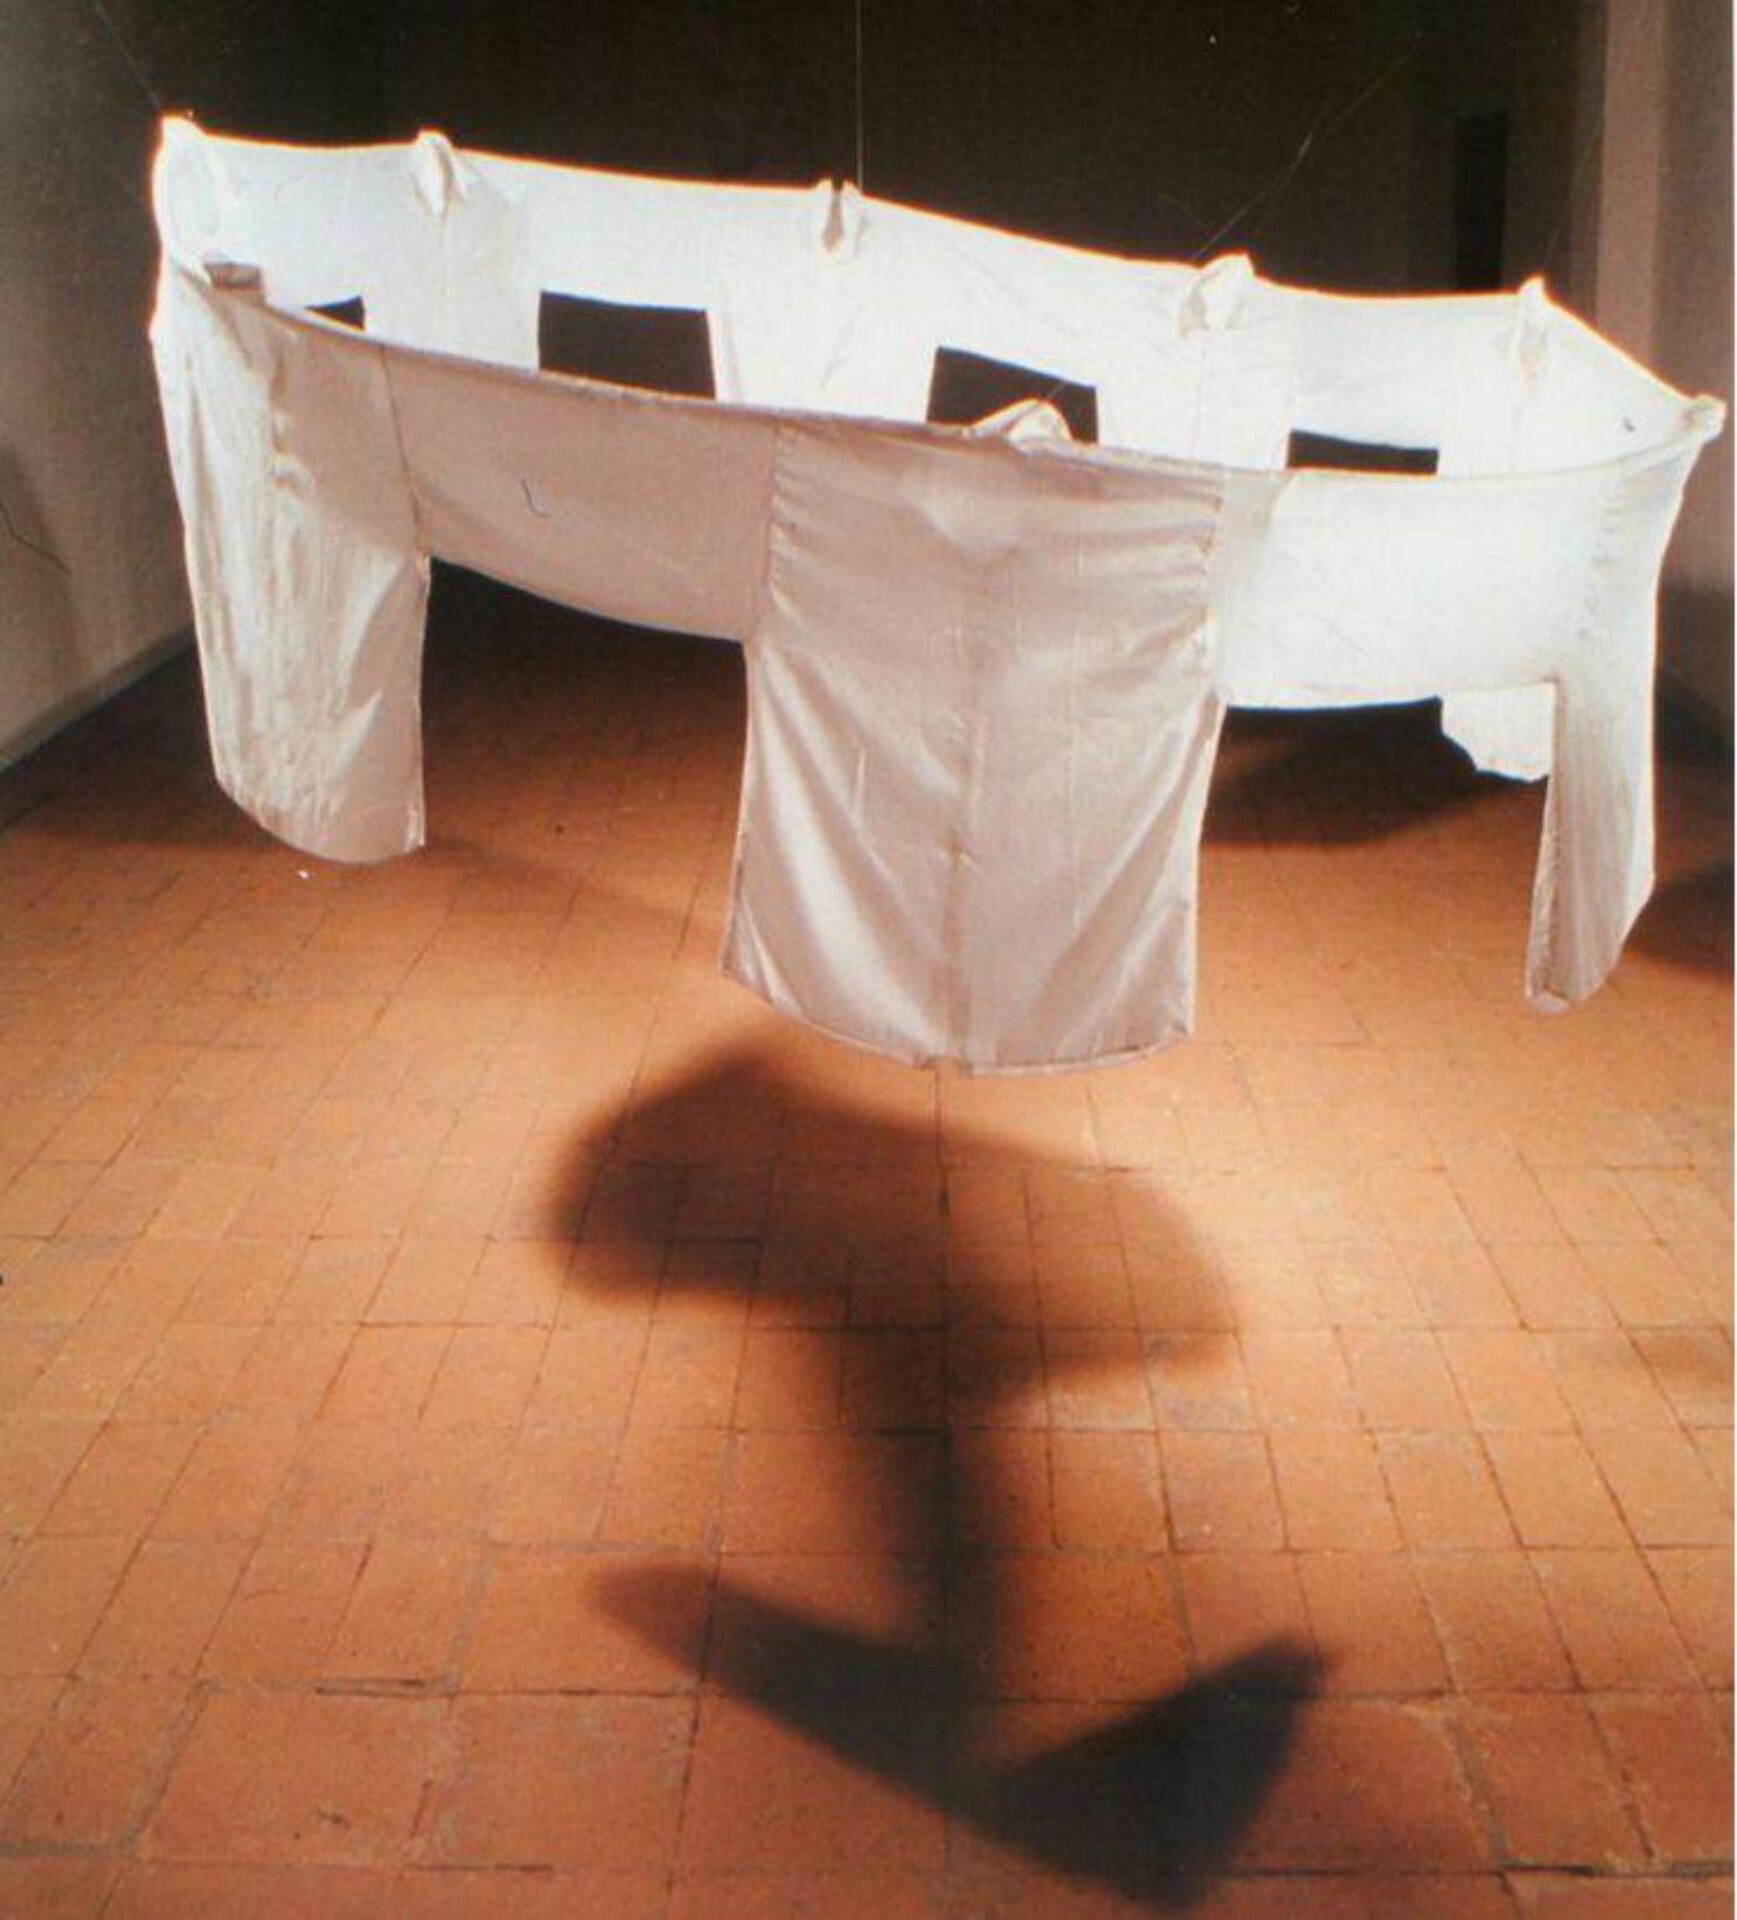 Krassimir Terziev, Let's Dance. Clothes for Collective Life, 1996